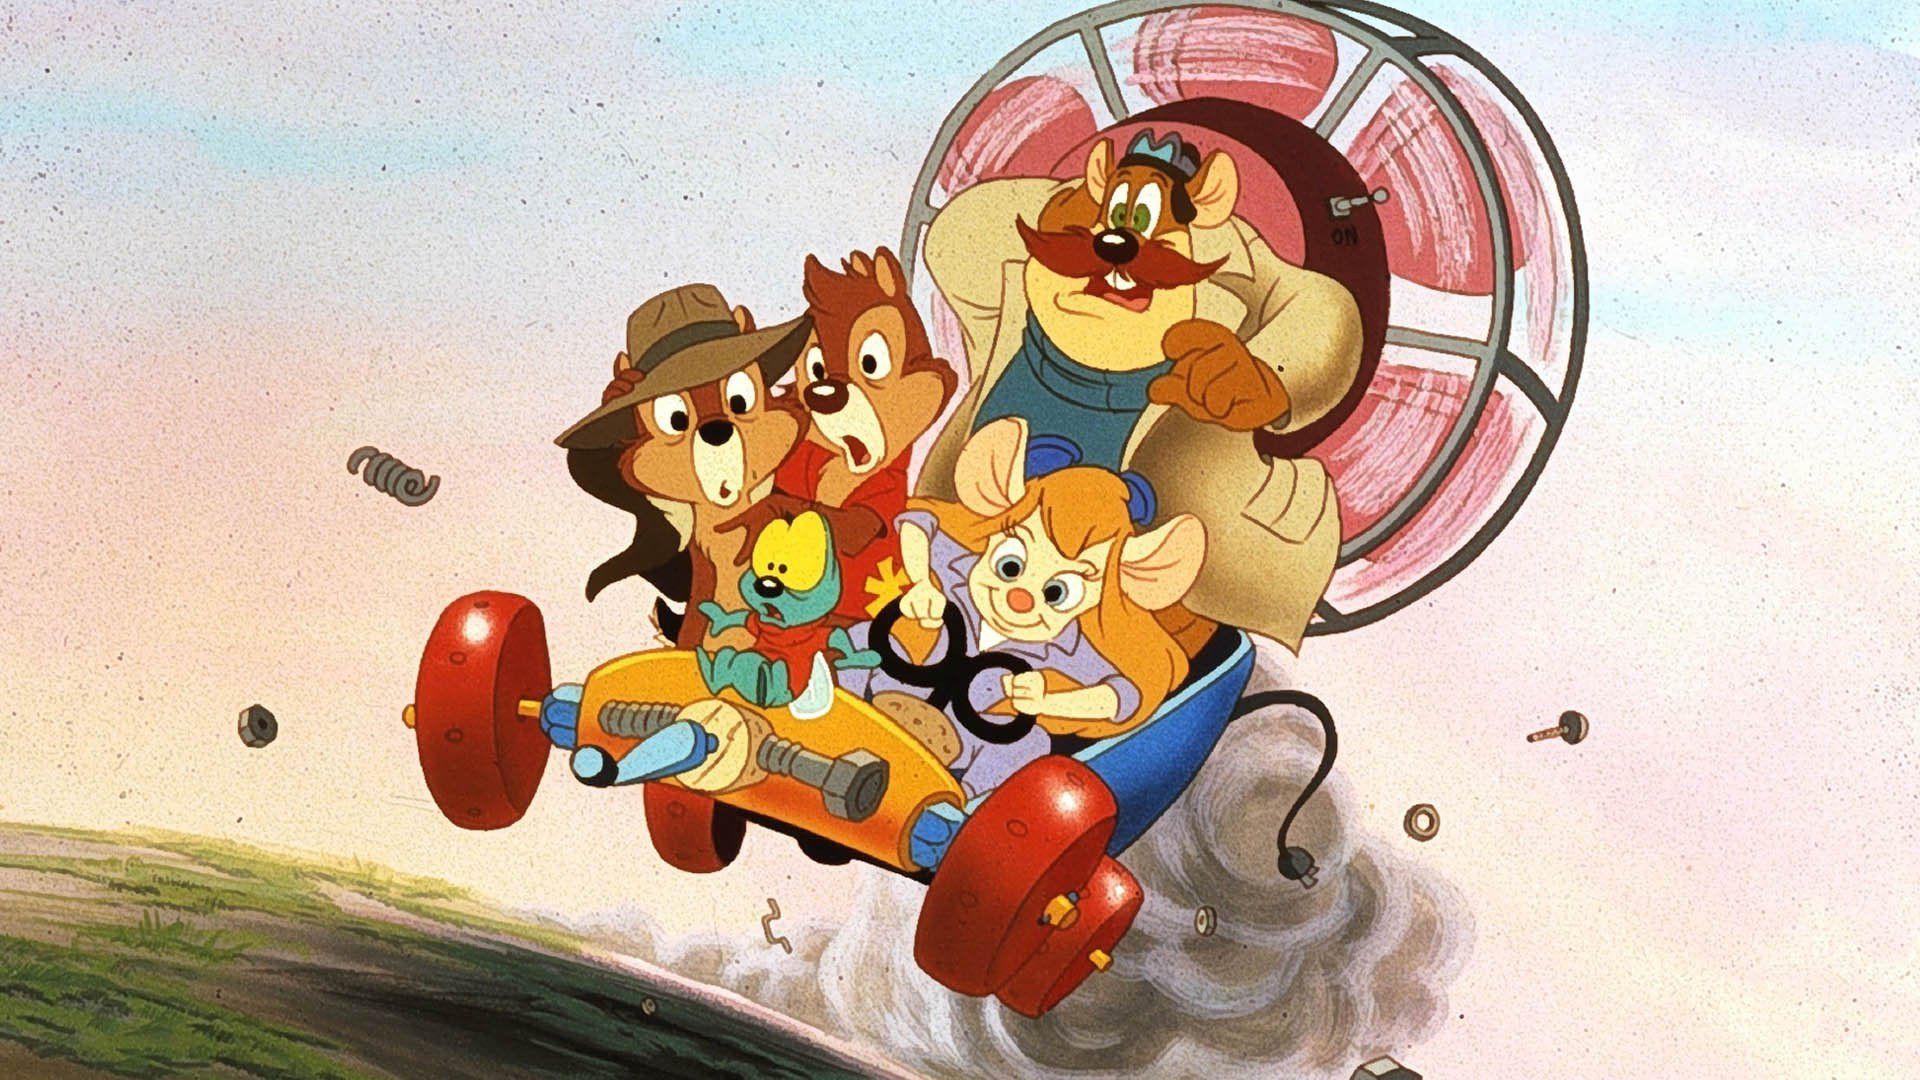 Chip 'N Dale Rescue Rangers Wallpaper High Quality